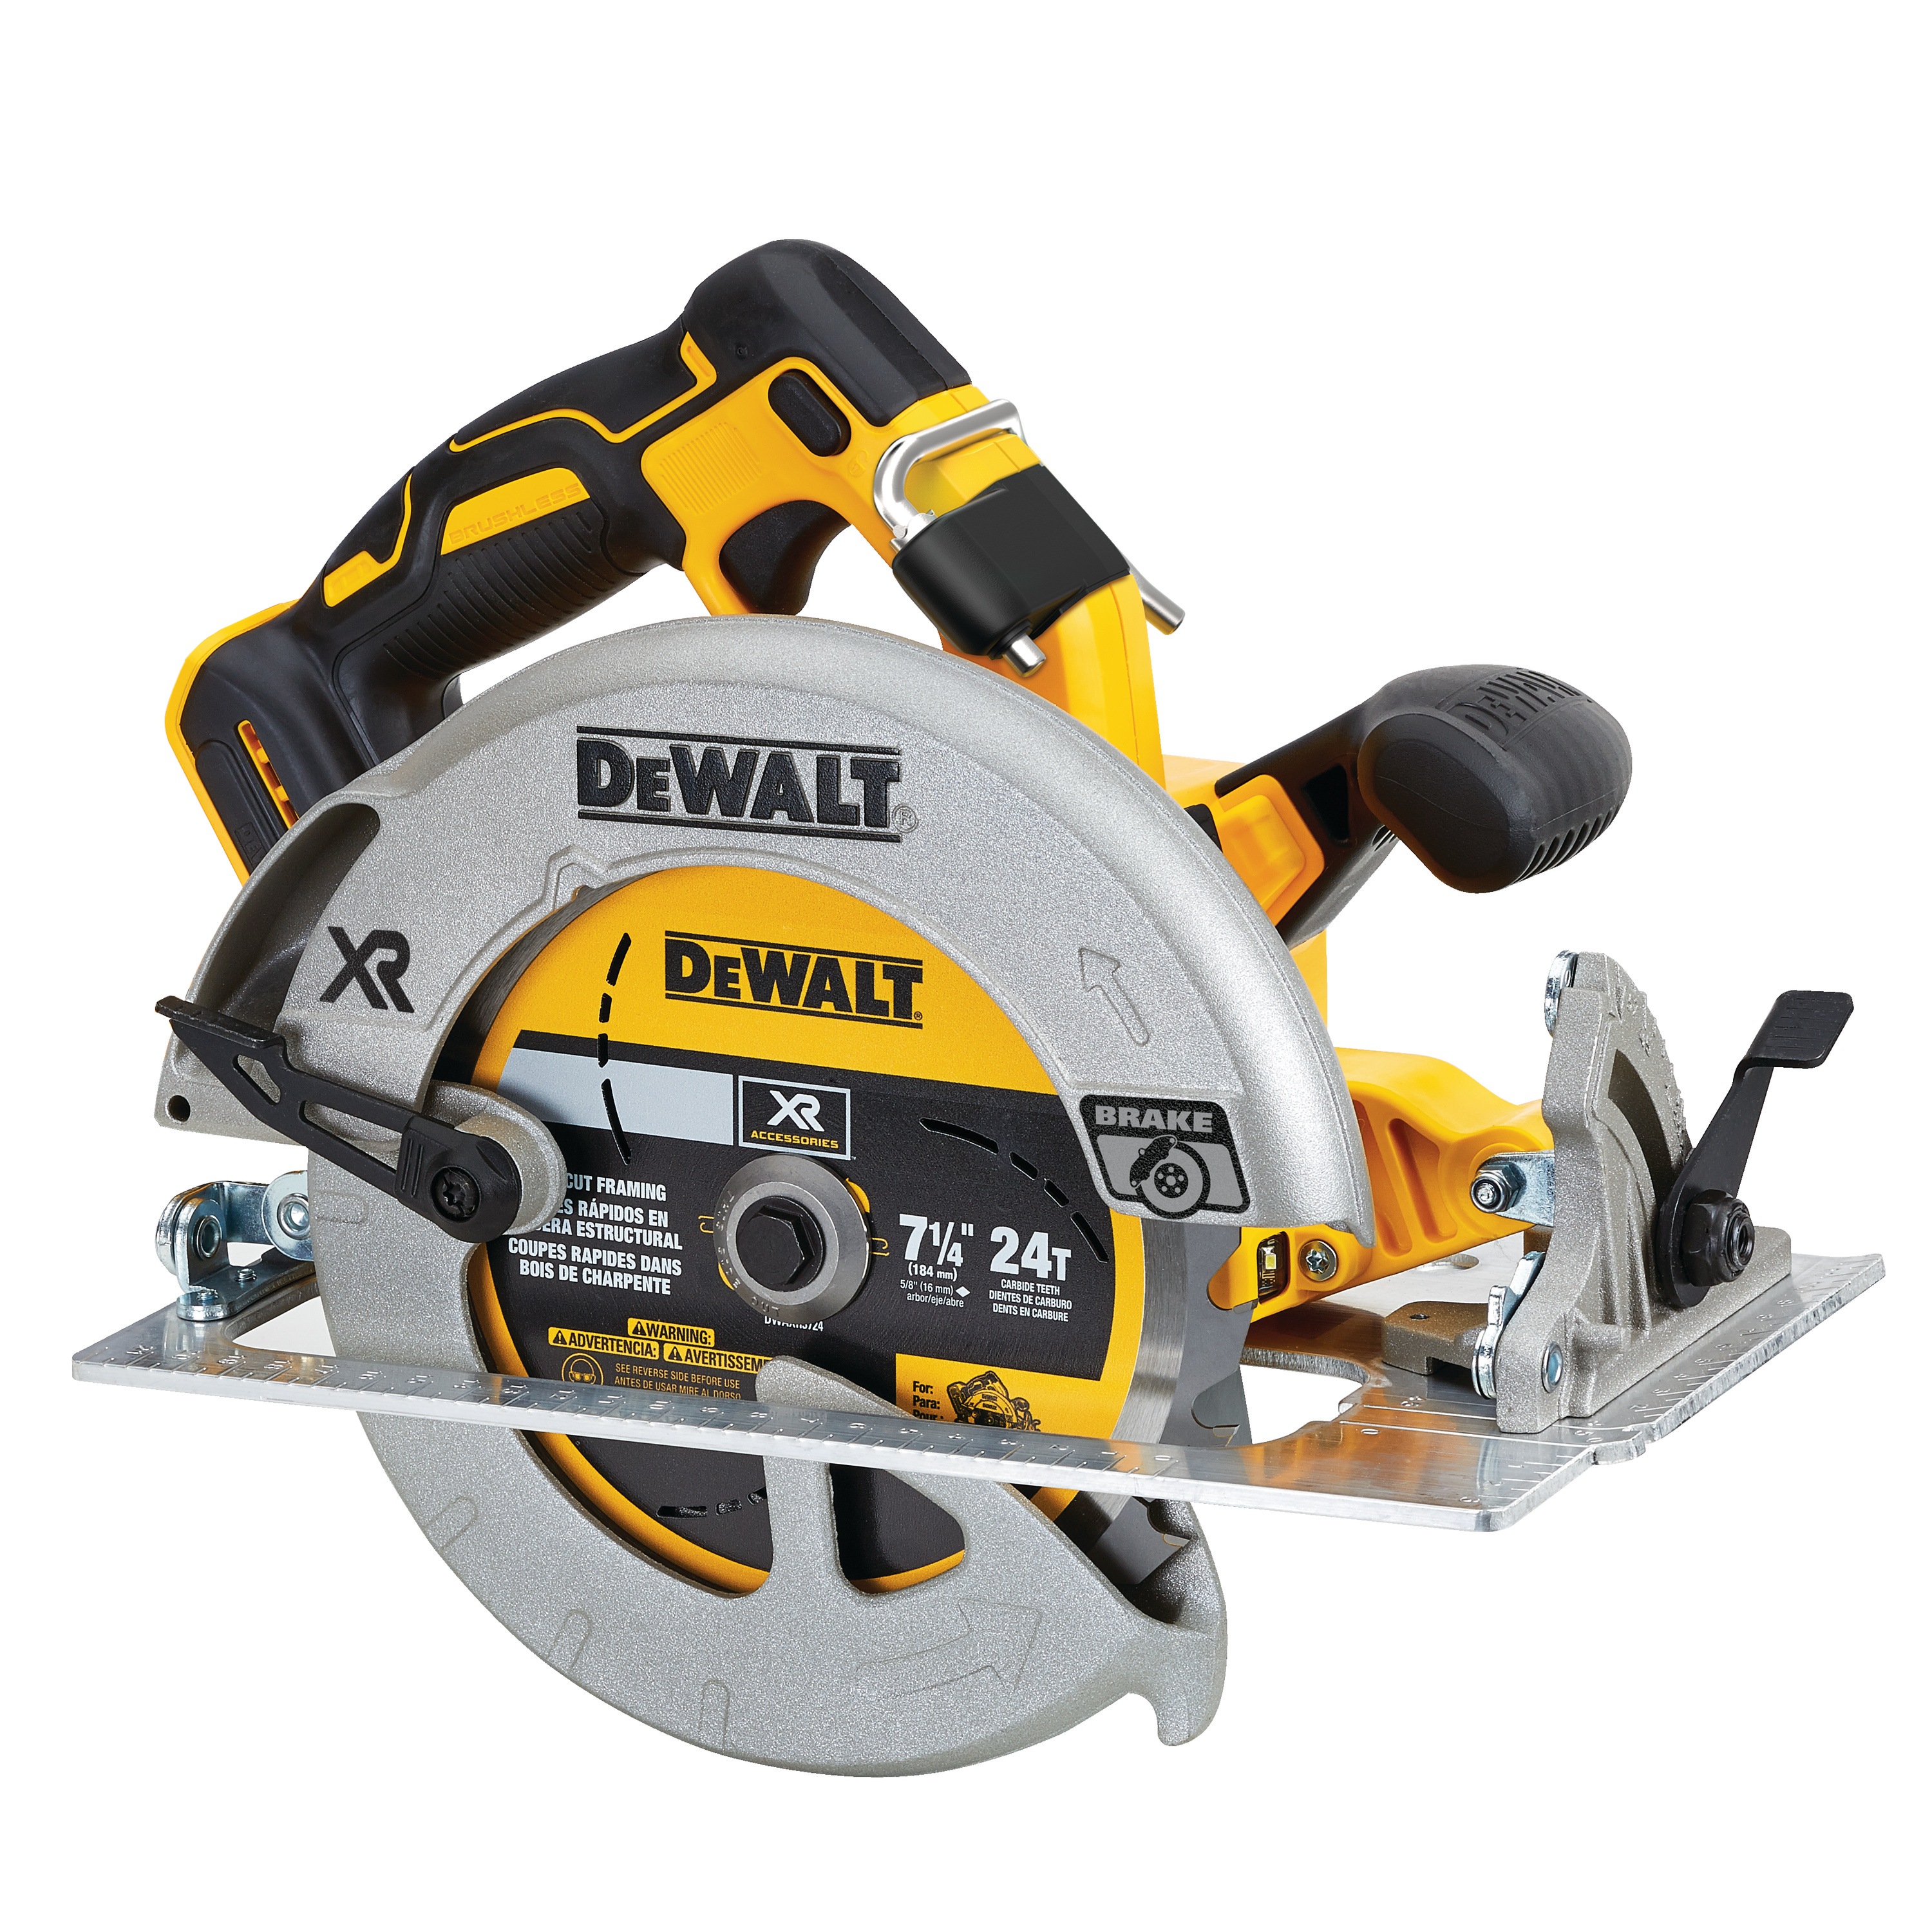 Profile of cordless circular saw tool only.